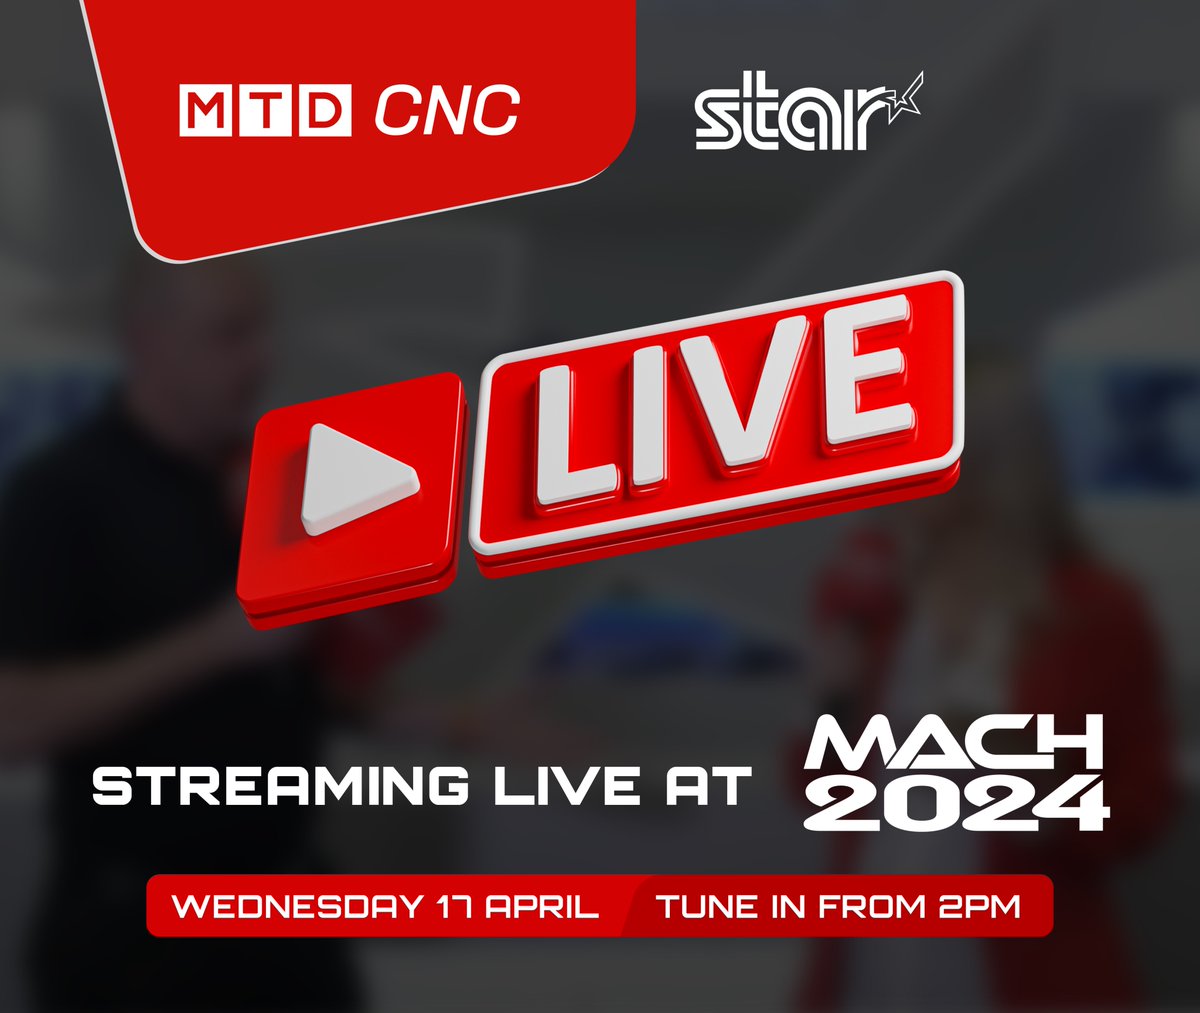 Join us live from @MACHexhibition with @mtdcnc on Wednesday 17 April where we'll be demonstrating the latest advancements in sliding head manufacturing solutions from 2pm... 🎥 There's still time to register to receive your free fast-track visitor pass: bit.ly/star-mach